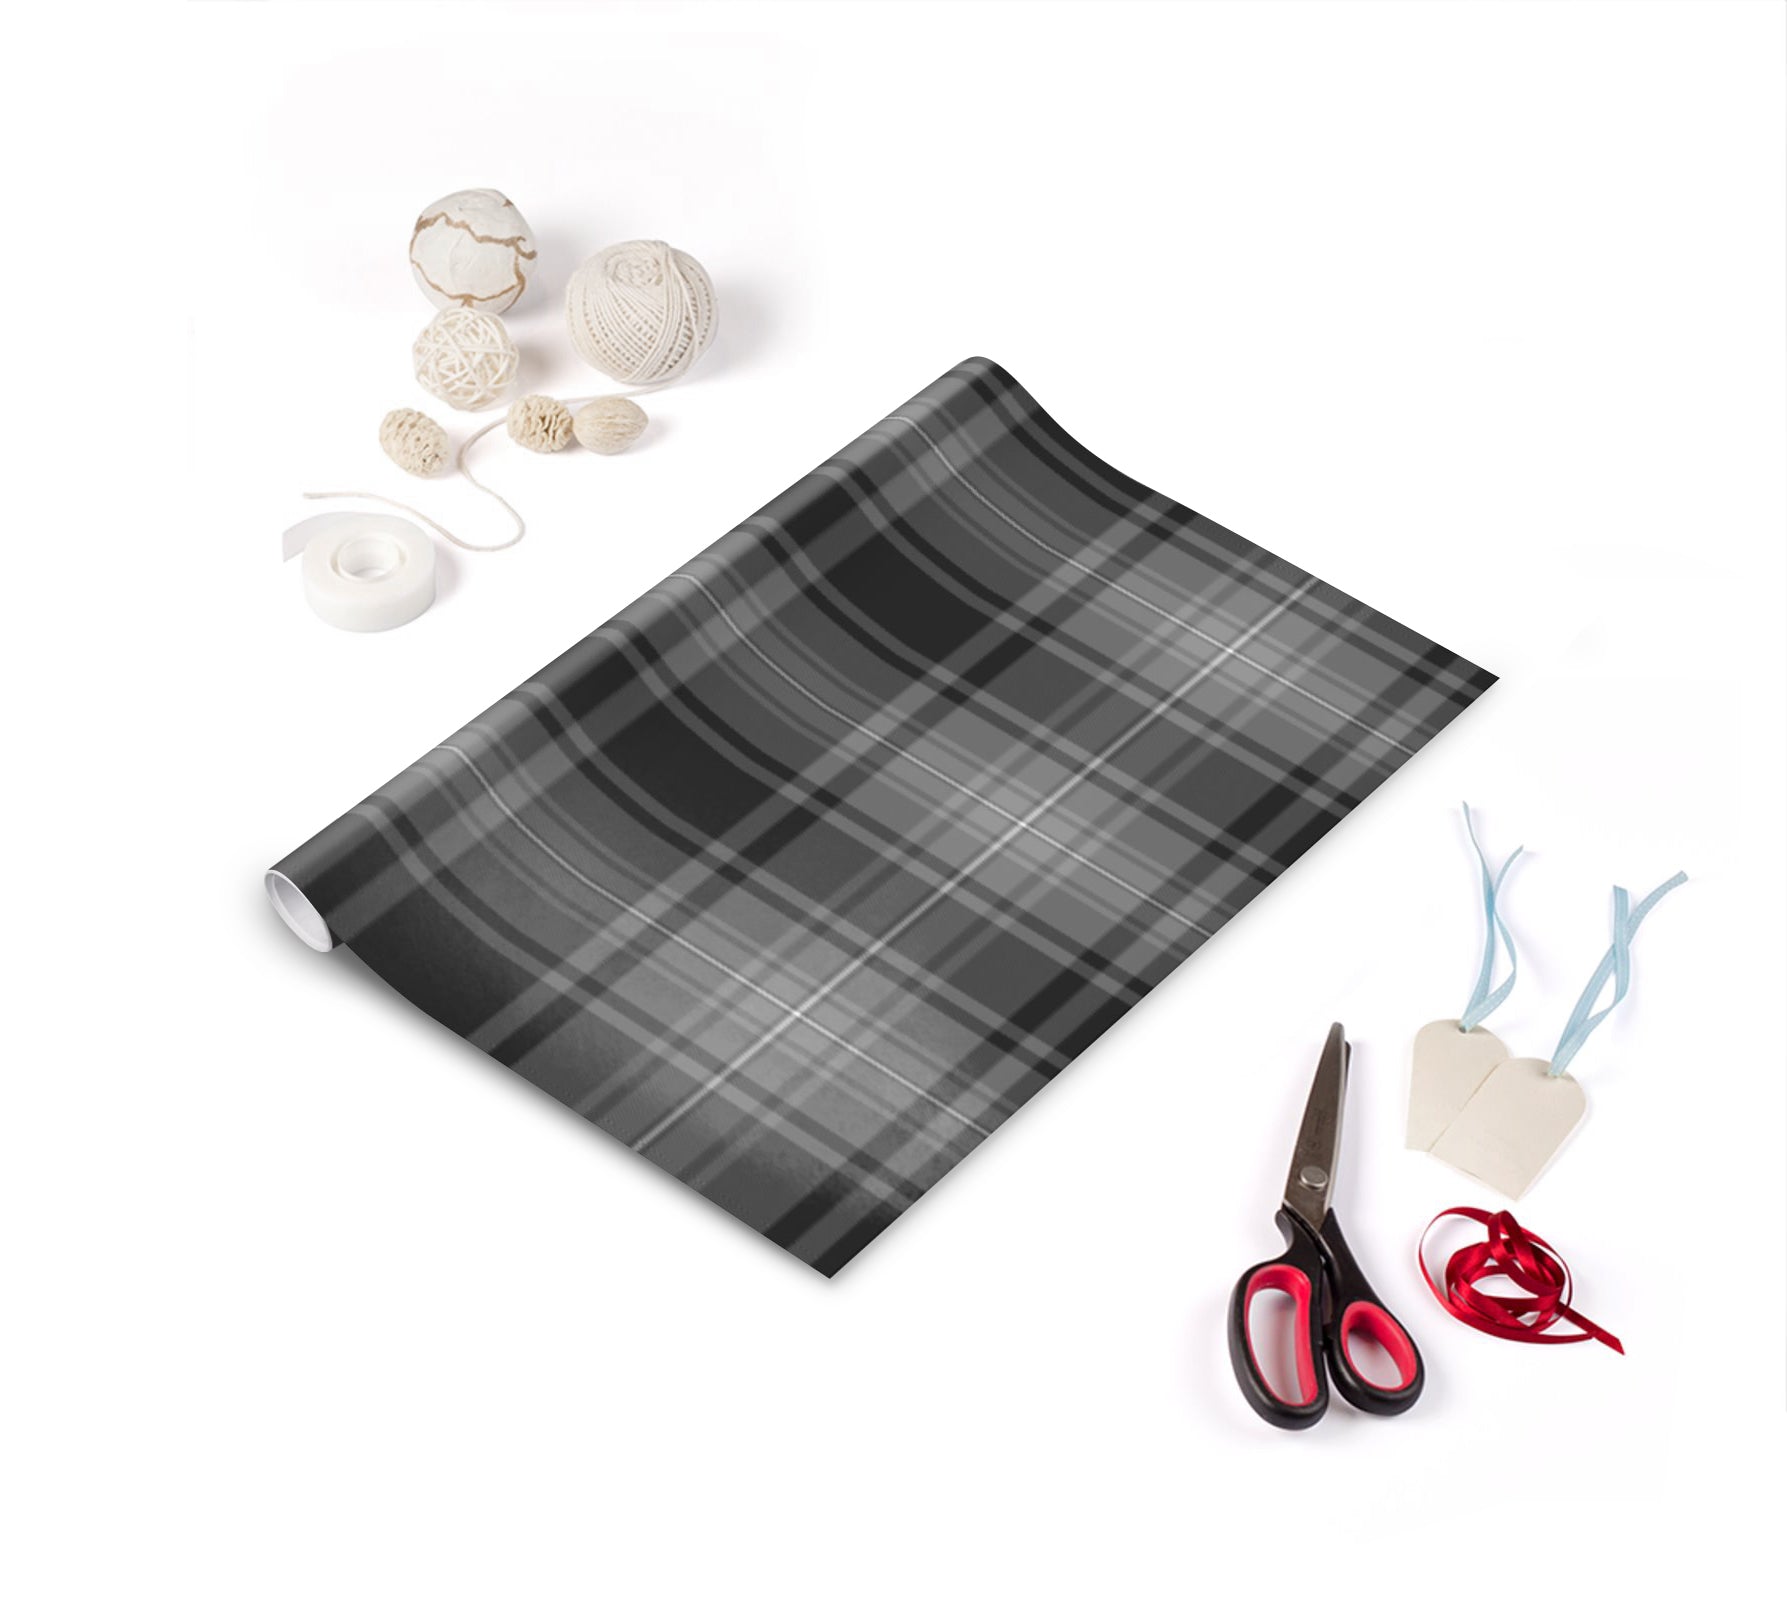 Designer wrapping paper exclusive to the Tartan Artisan ®. Featuring the Titanium™ Tartan, created in 2013 to acknowledge Scotland's world class reputation for innovation, research and development in science, engineering and technology